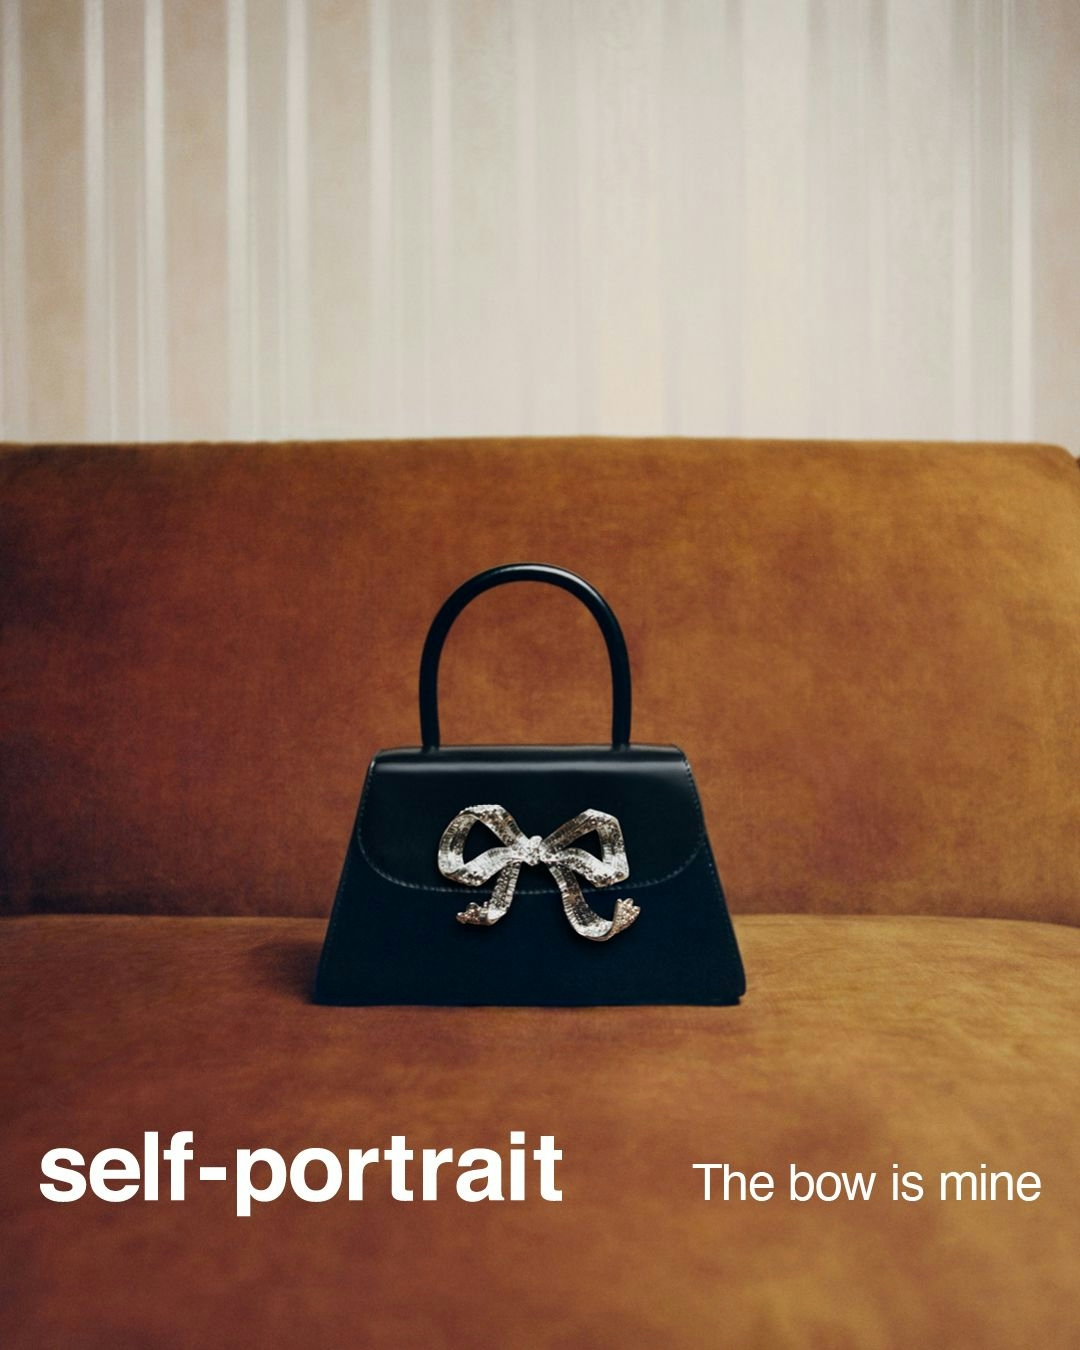 “The Bow Is Mine” Campaign